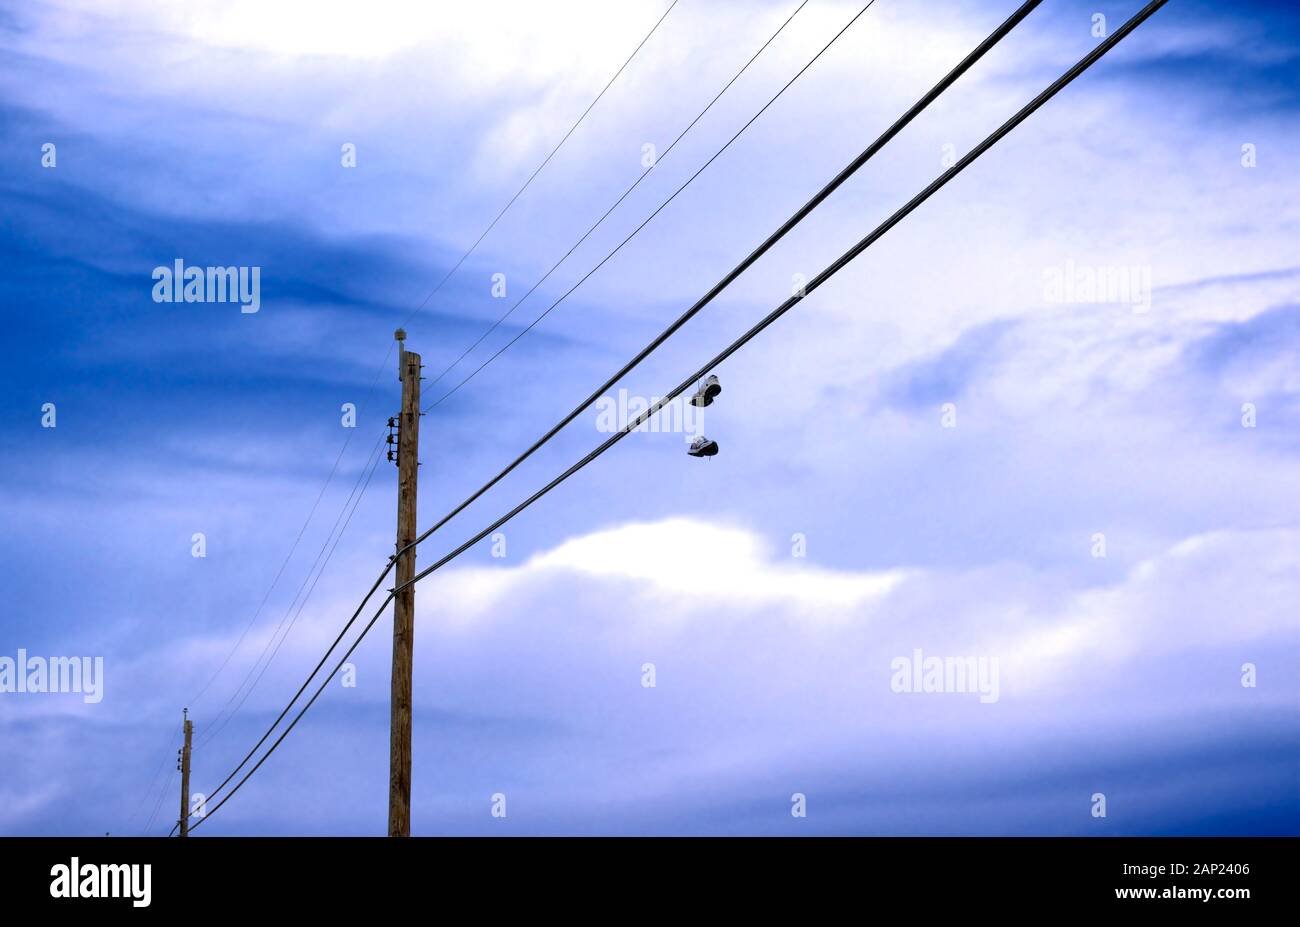 A pair of sneakers dangling on power lines under a cloudy blue sky, a metaphor for desertion and abandonment Stock Photo